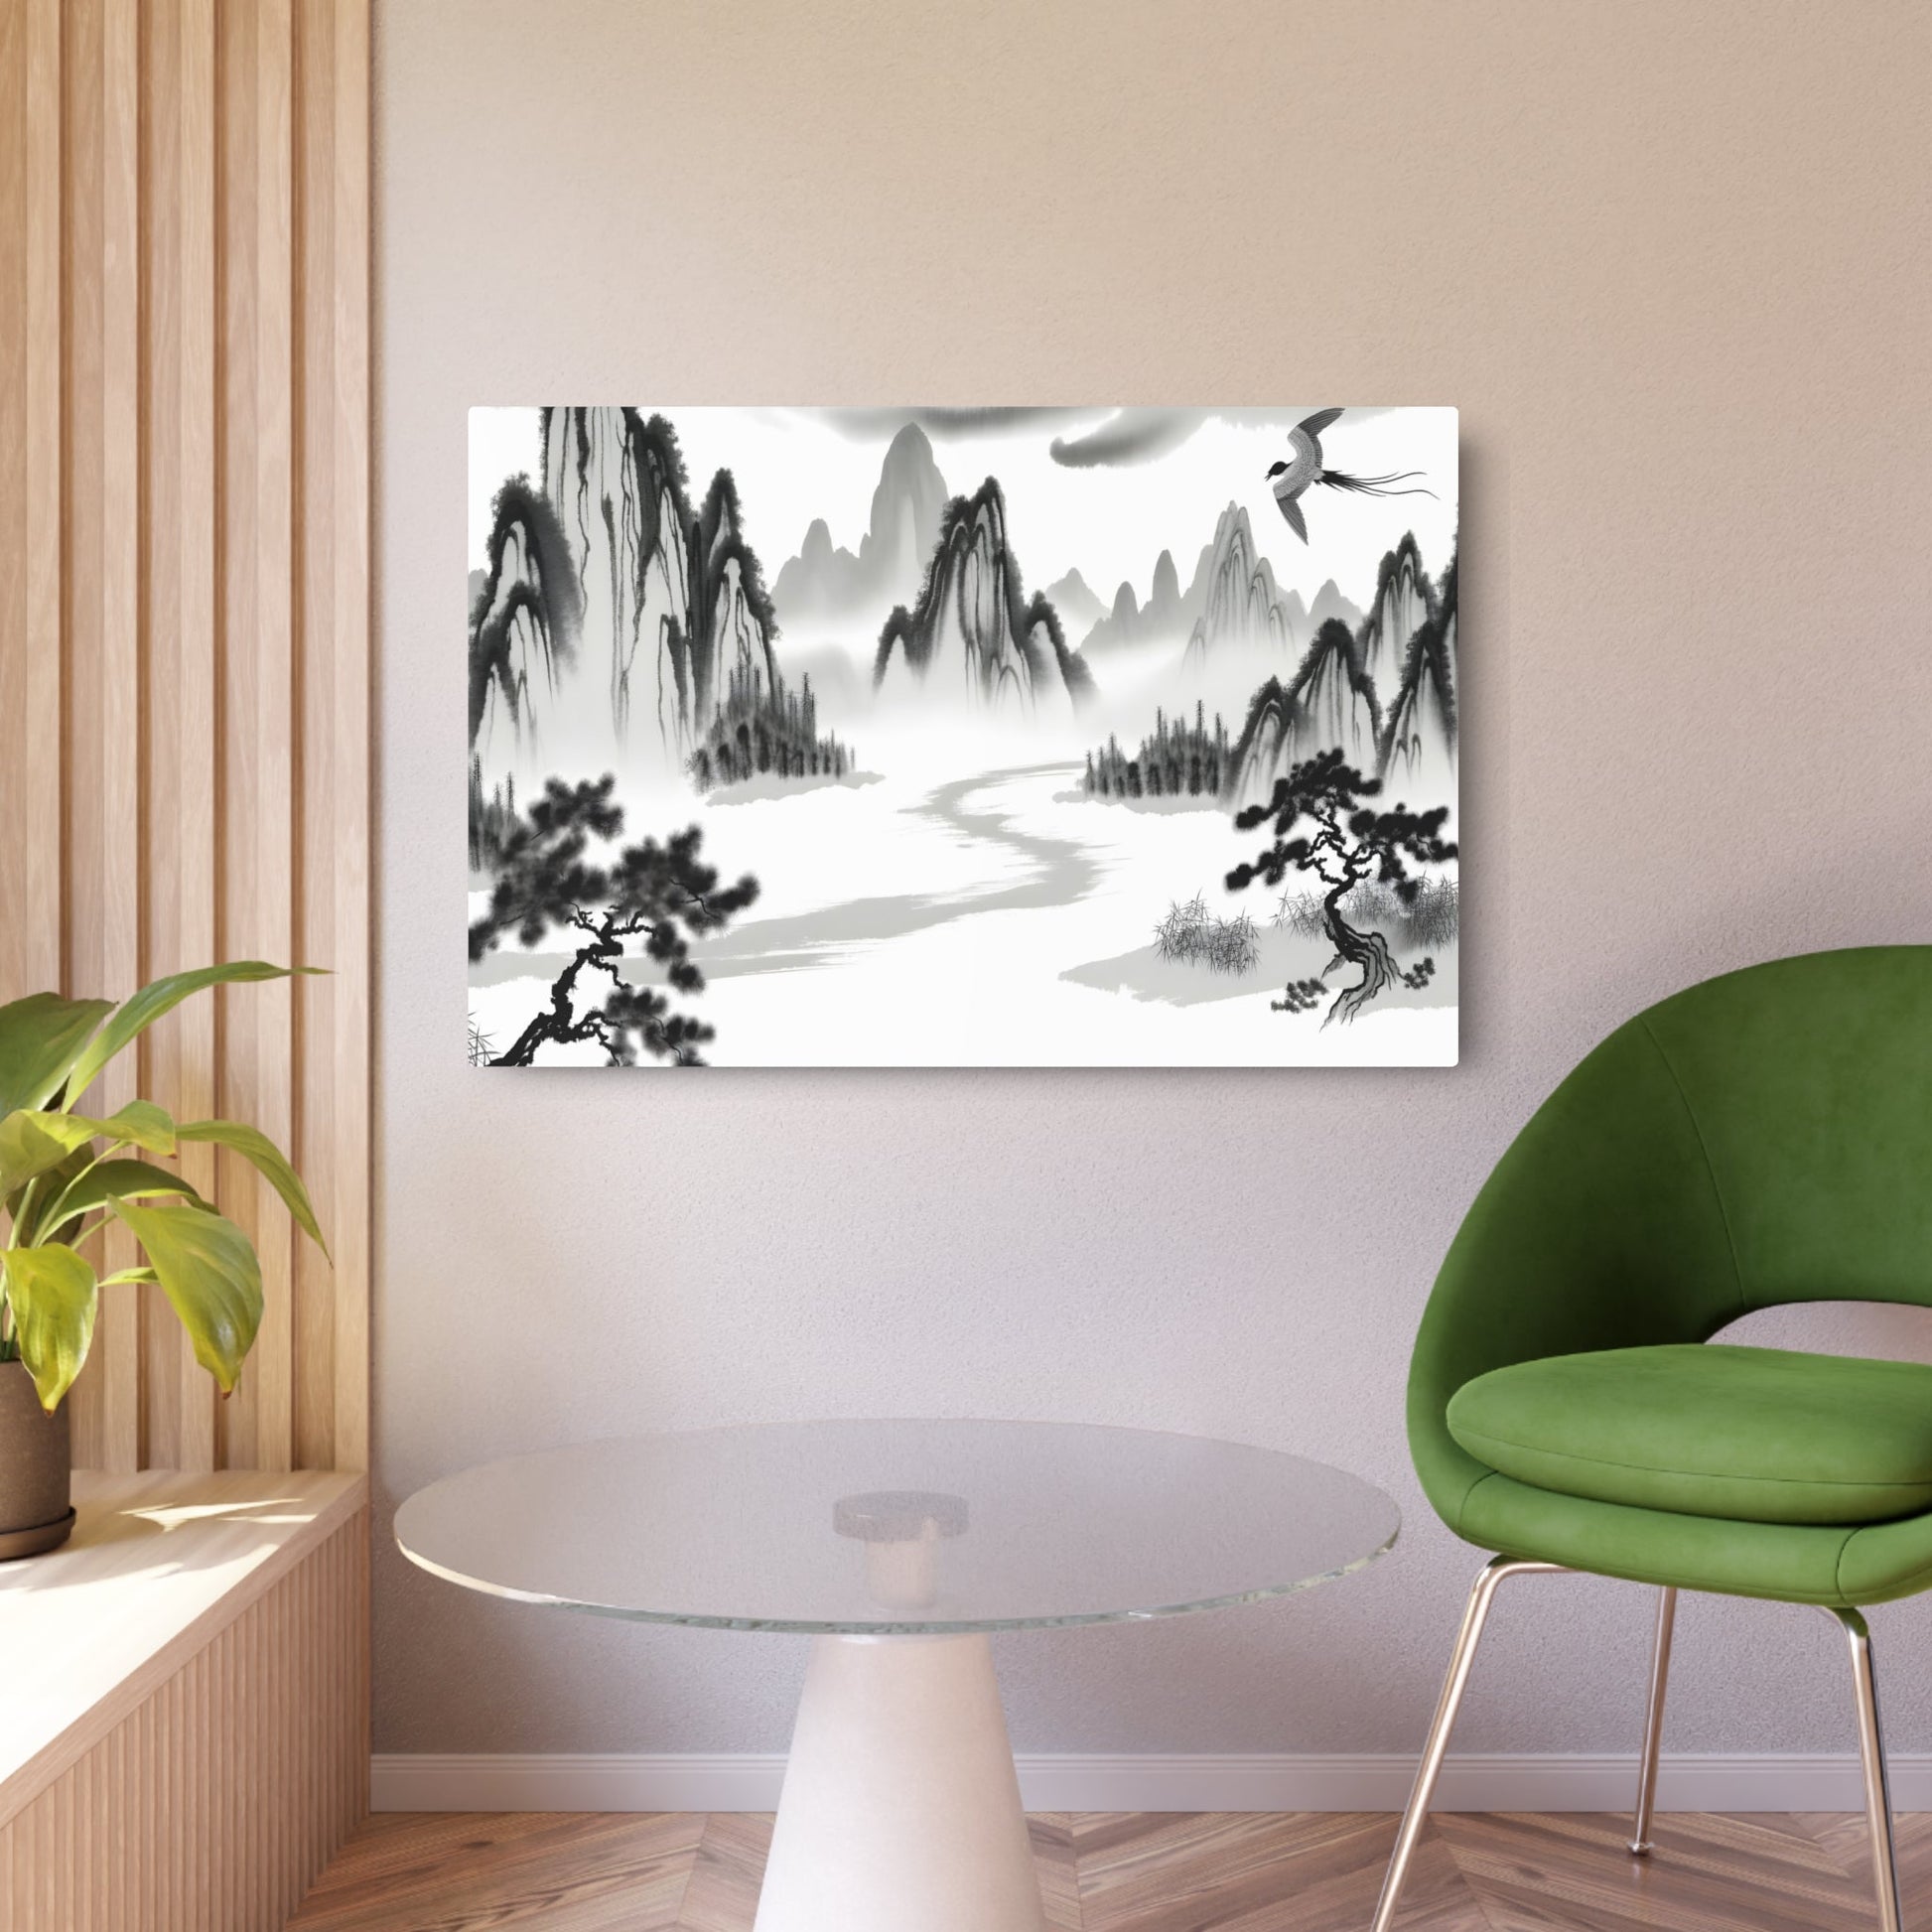 Metal Poster Art | "Traditional Chinese Landscape Artwork - Ink Wash Painting of Scenic Mountains, Serene Trees, Winding River and Bird in Flight - Asian Art Styles - Metal Poster Art 36″ x 24″ (Horizontal) 0.12''